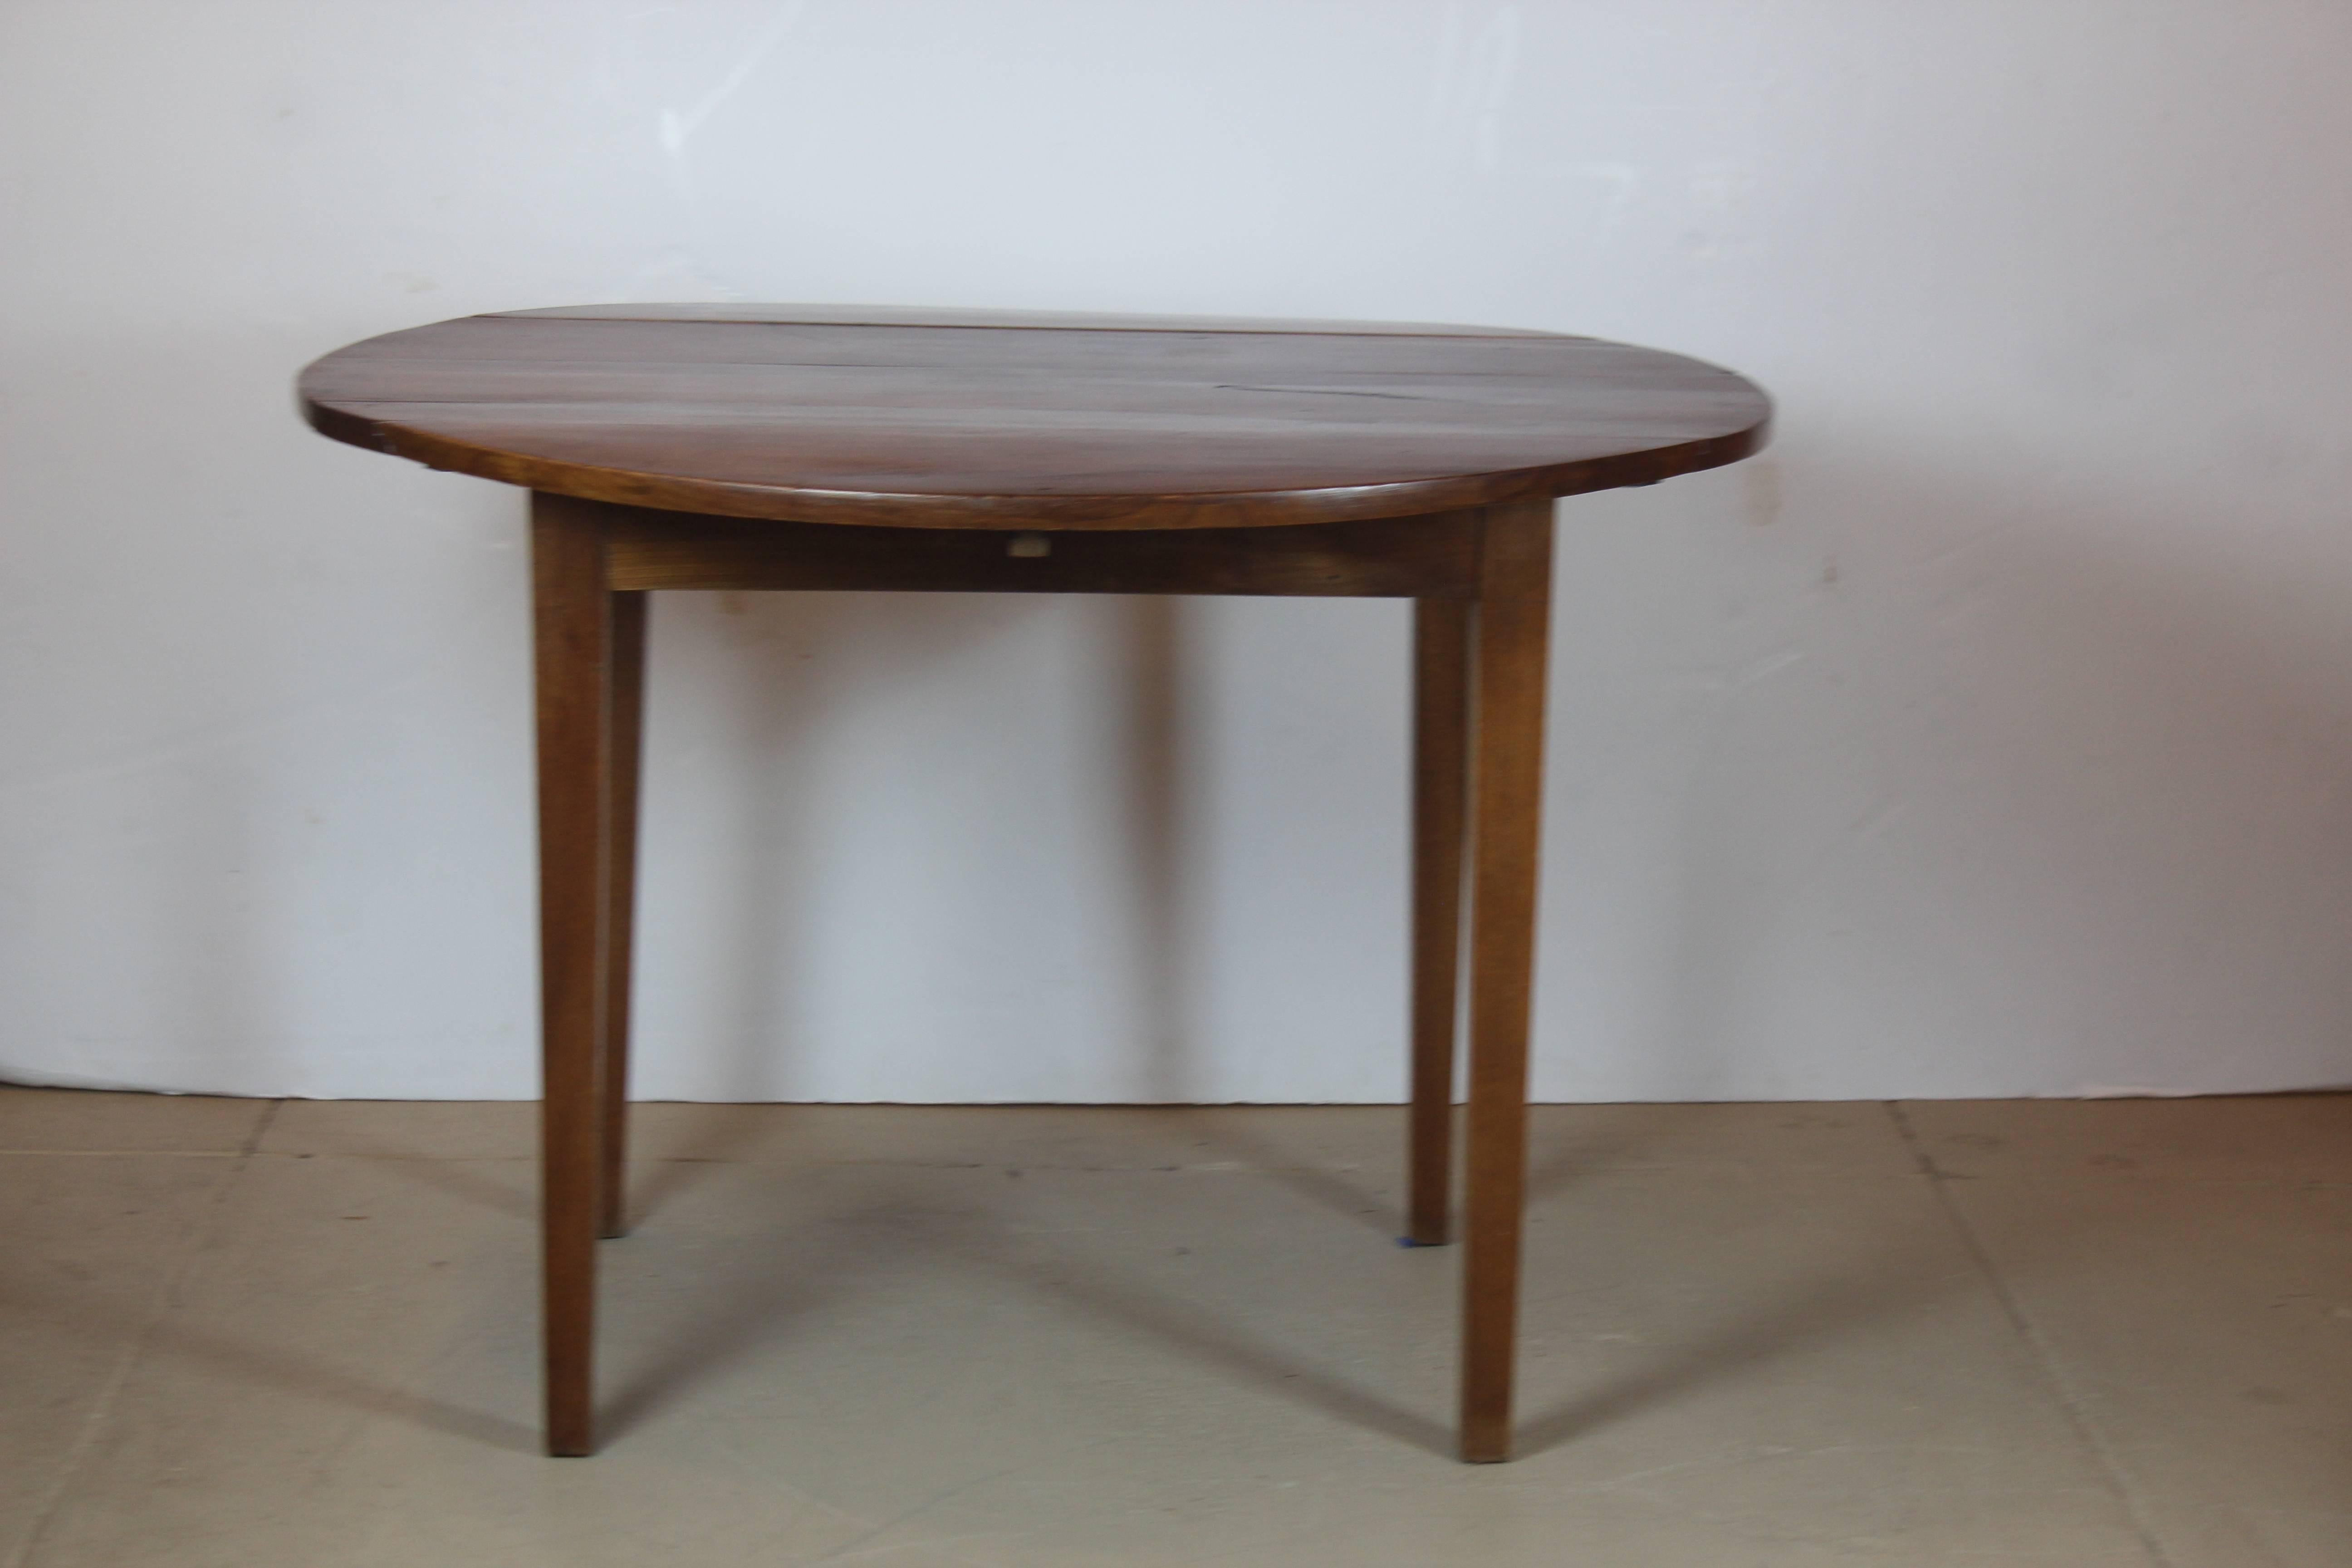 19th century round drop-leaf table. Measures: Opened 44